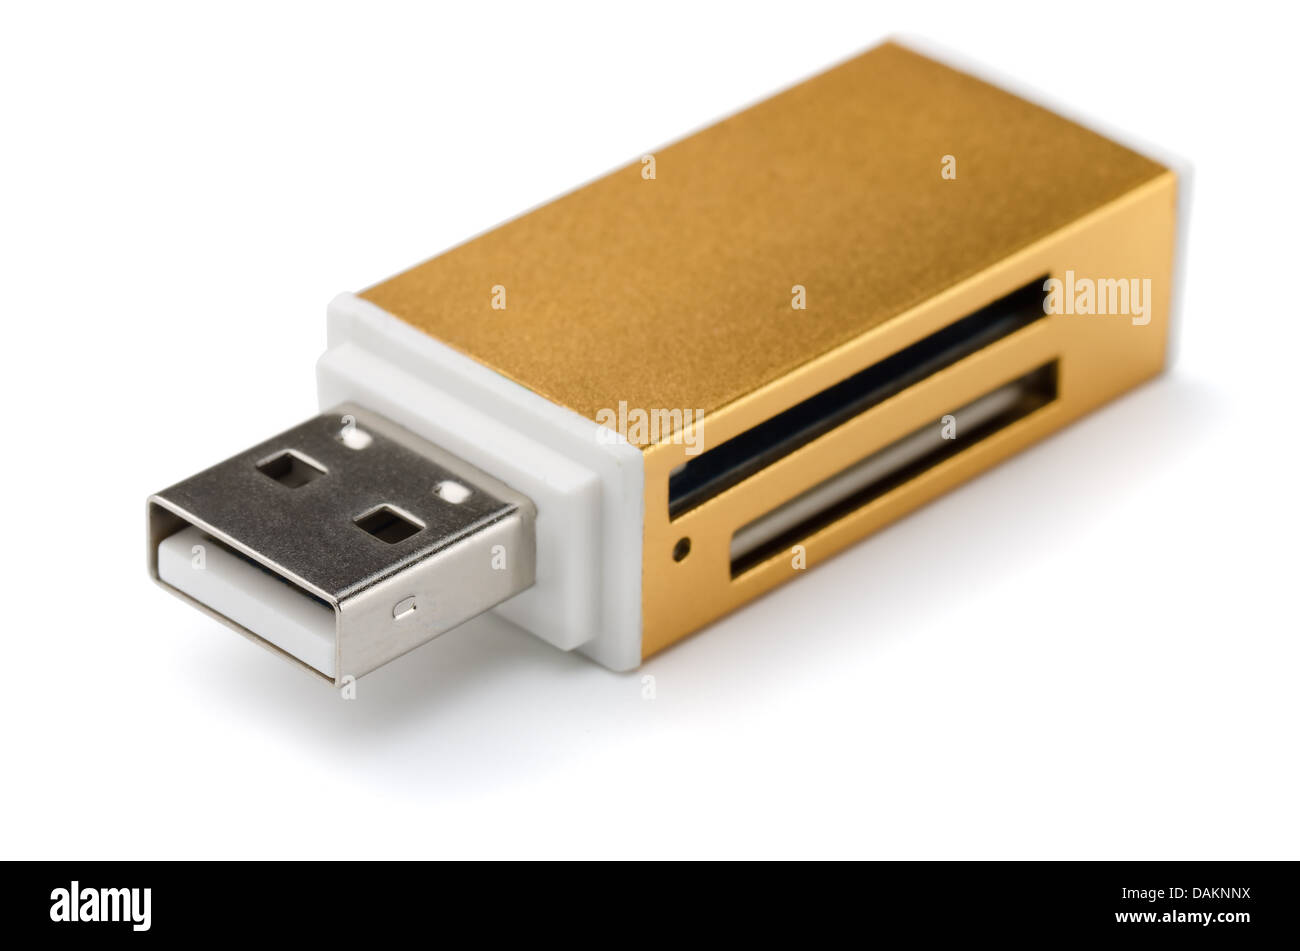 External USB multi card reader isolated on white Stock Photo